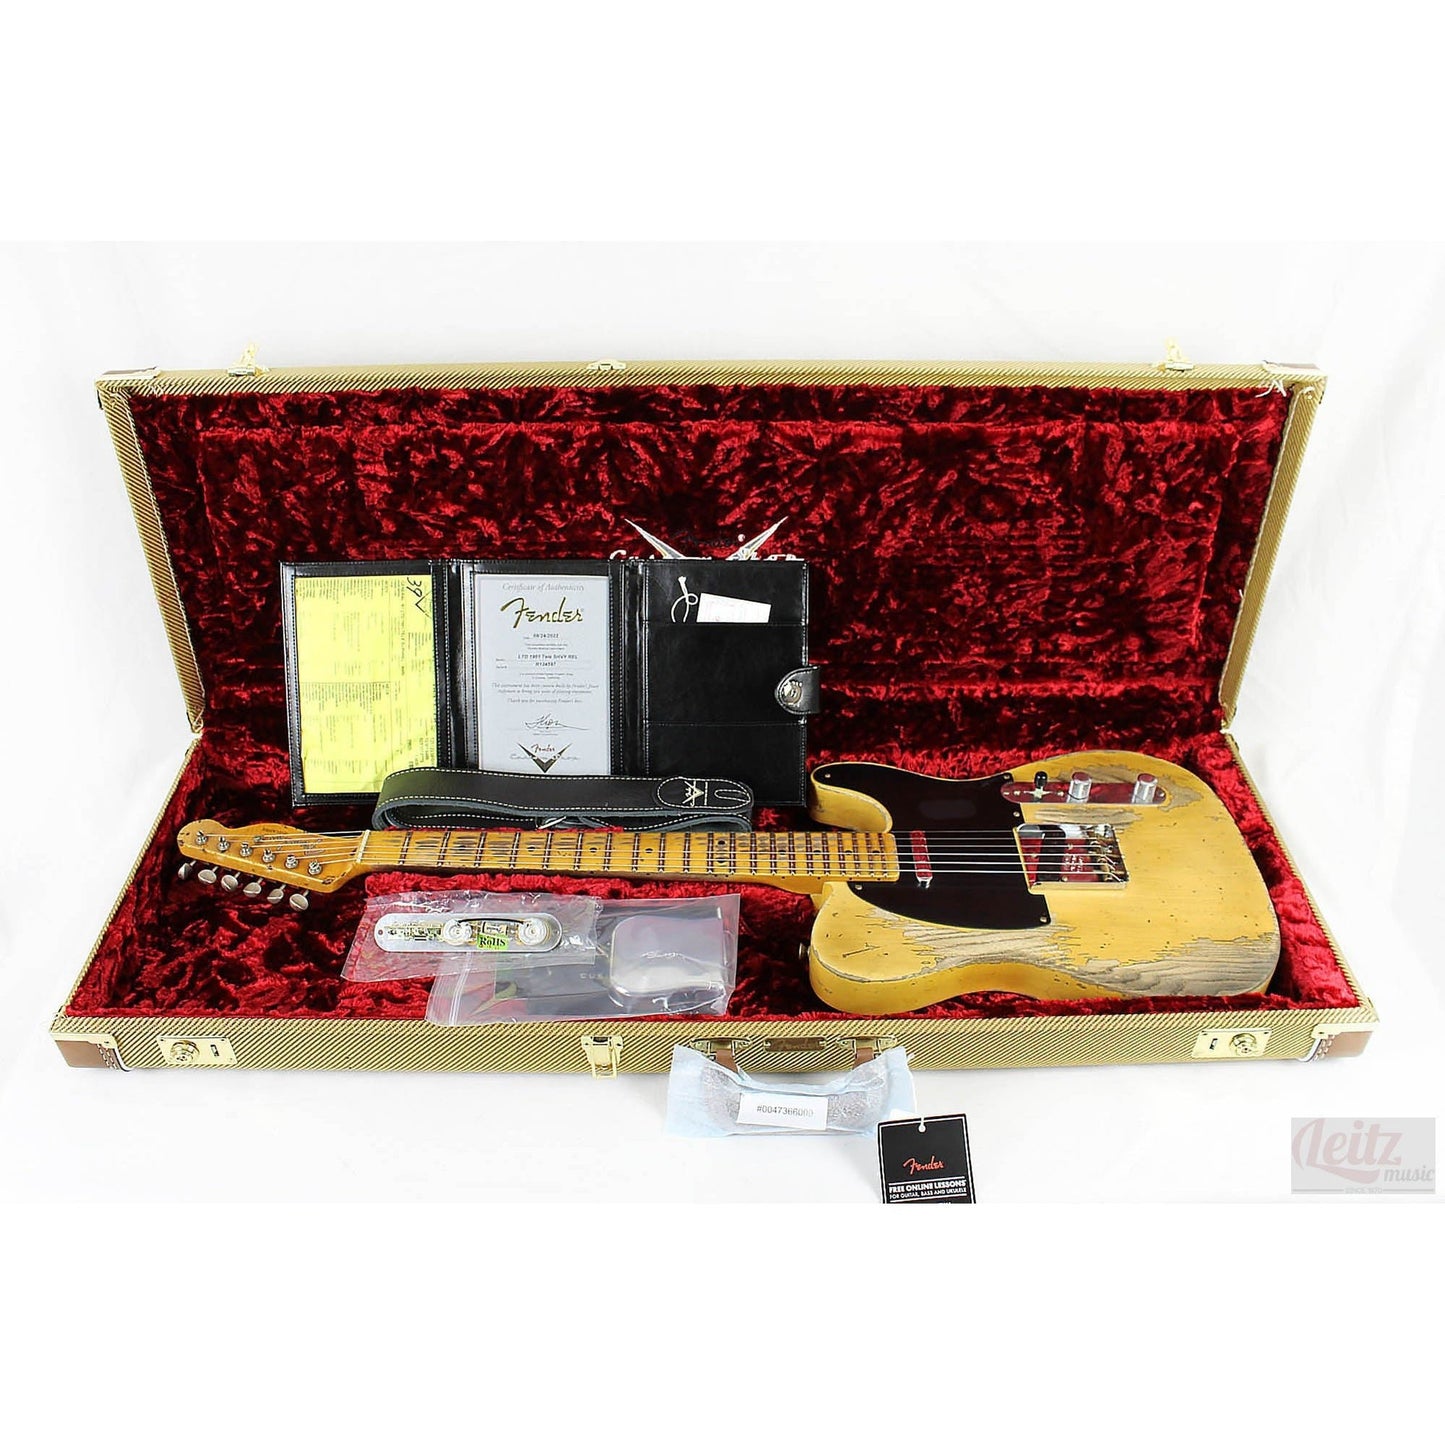 Fender Custom Shop Limited Edition 51 Telecaster Super Heavy Relic - Age Nocaster Blonde - Leitz Music--R124597